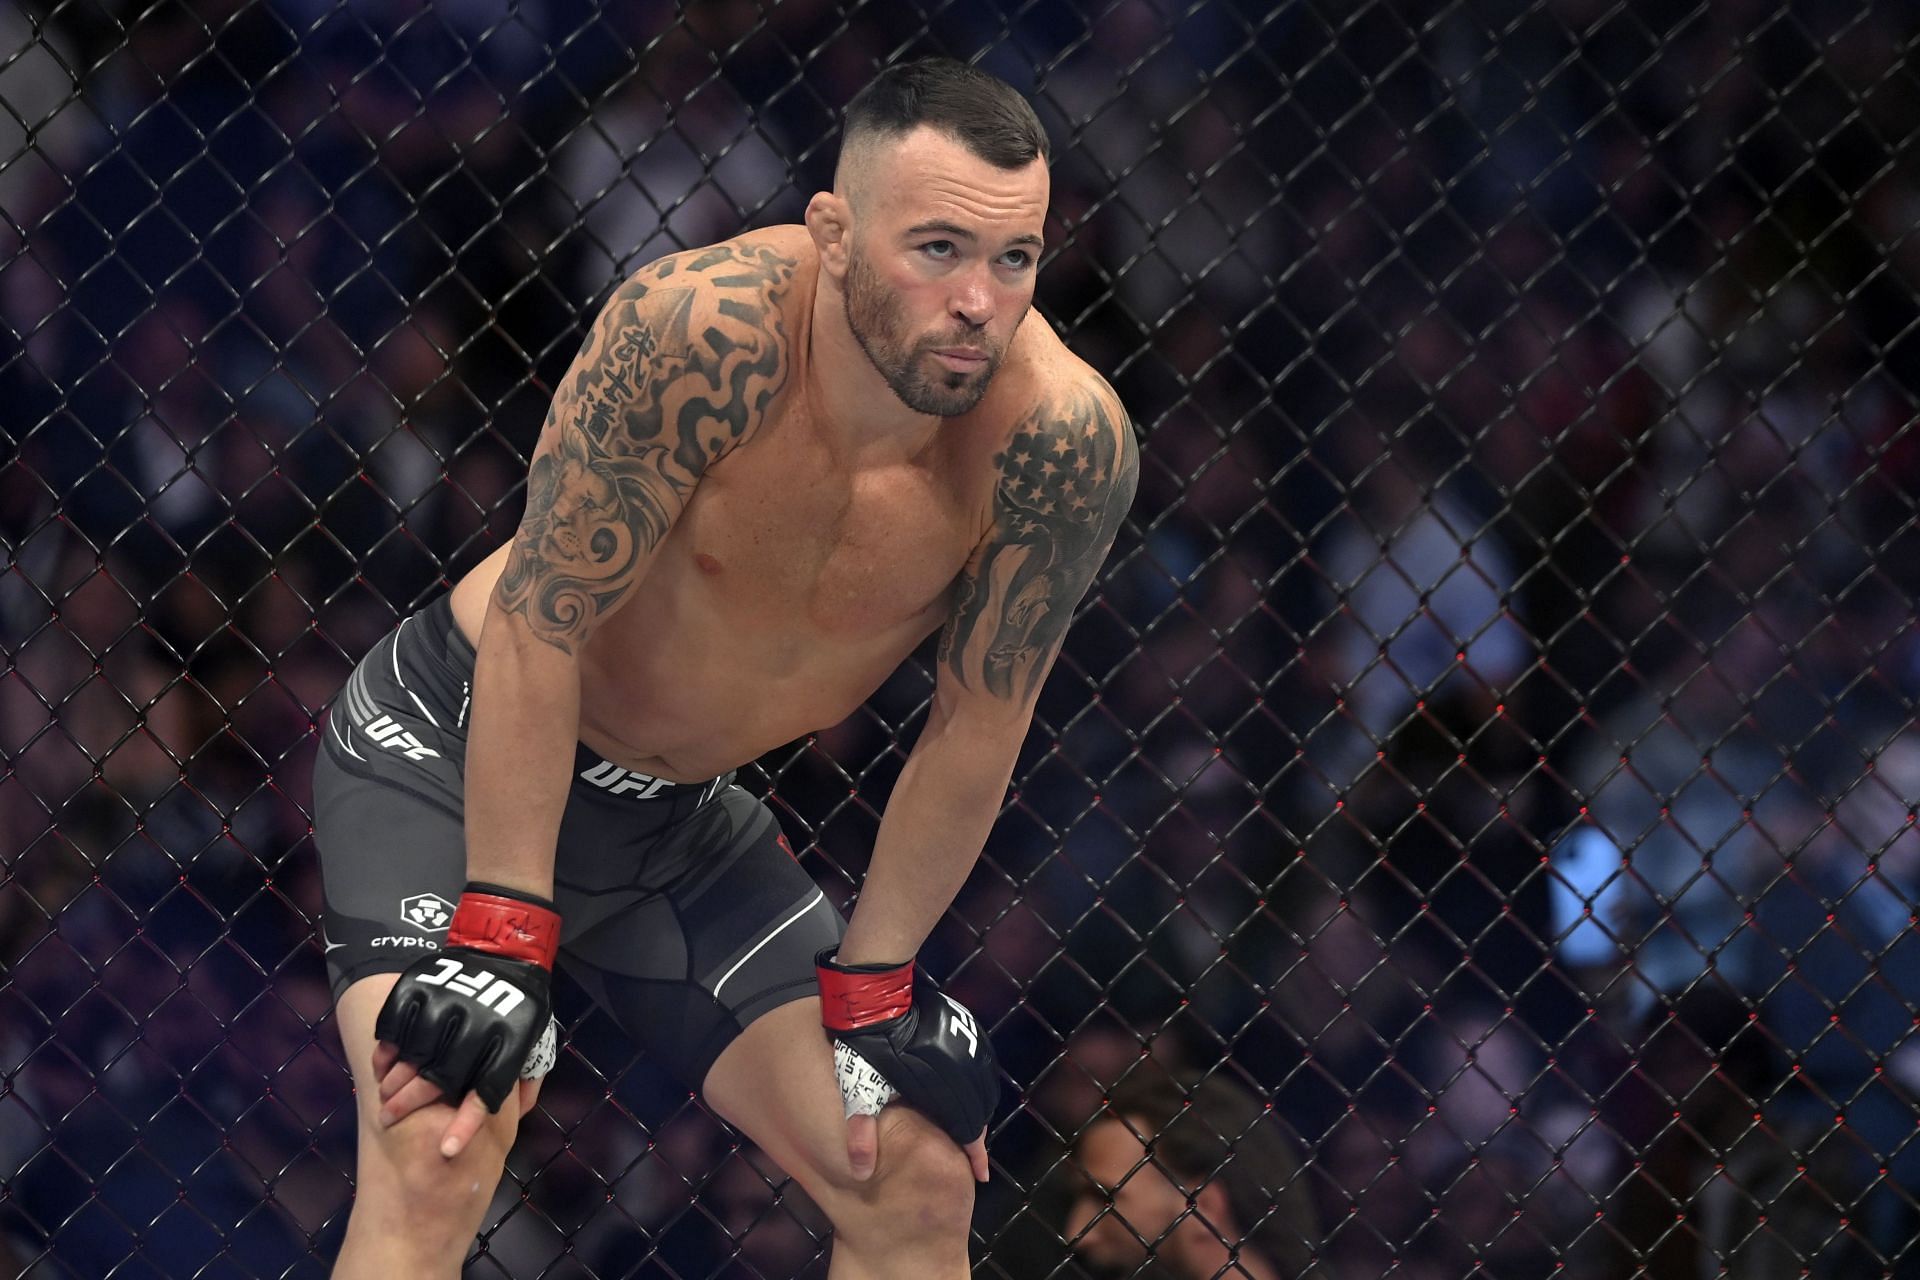 A fight with Colby Covington could make Nate Diaz a lot of money